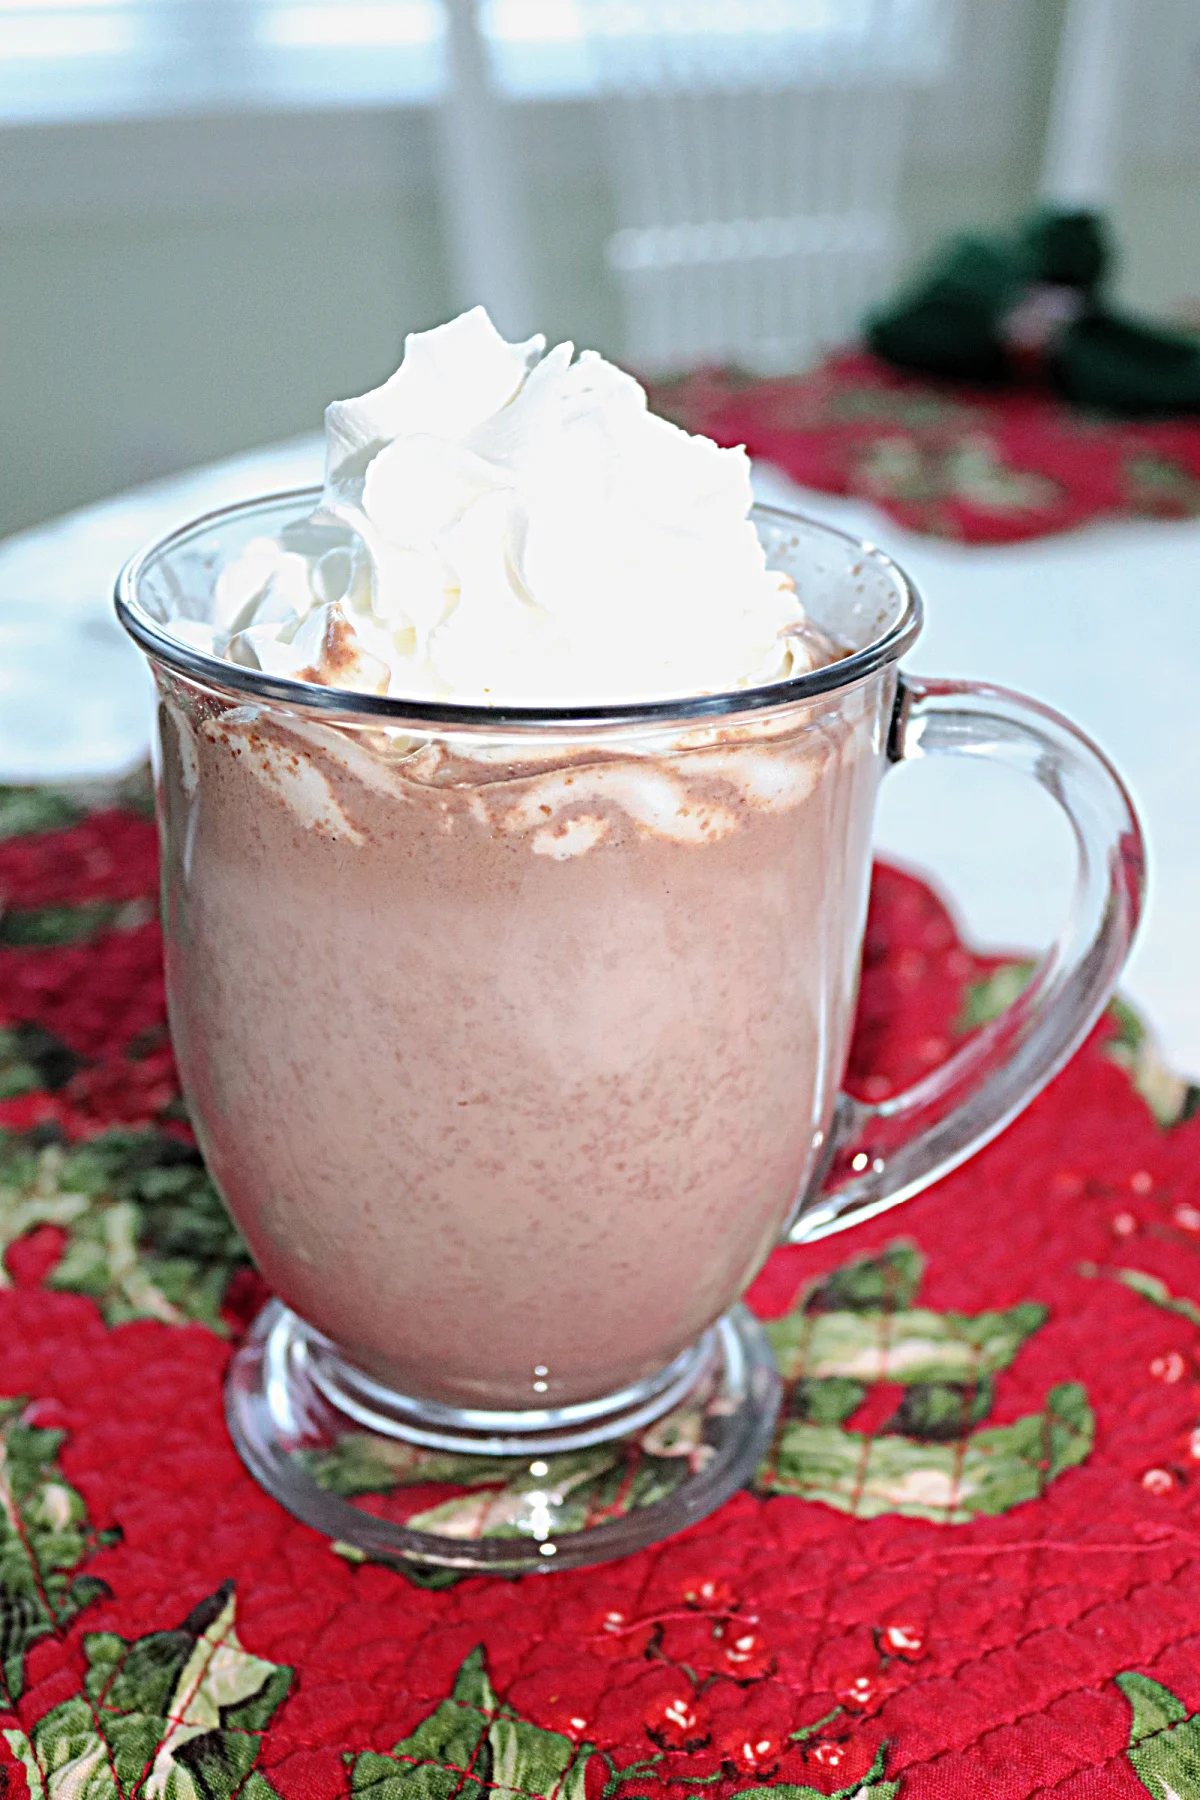 Ultimate hot chocolate in a glass mug with whipped cream on top sitting on a Christmas placemat.